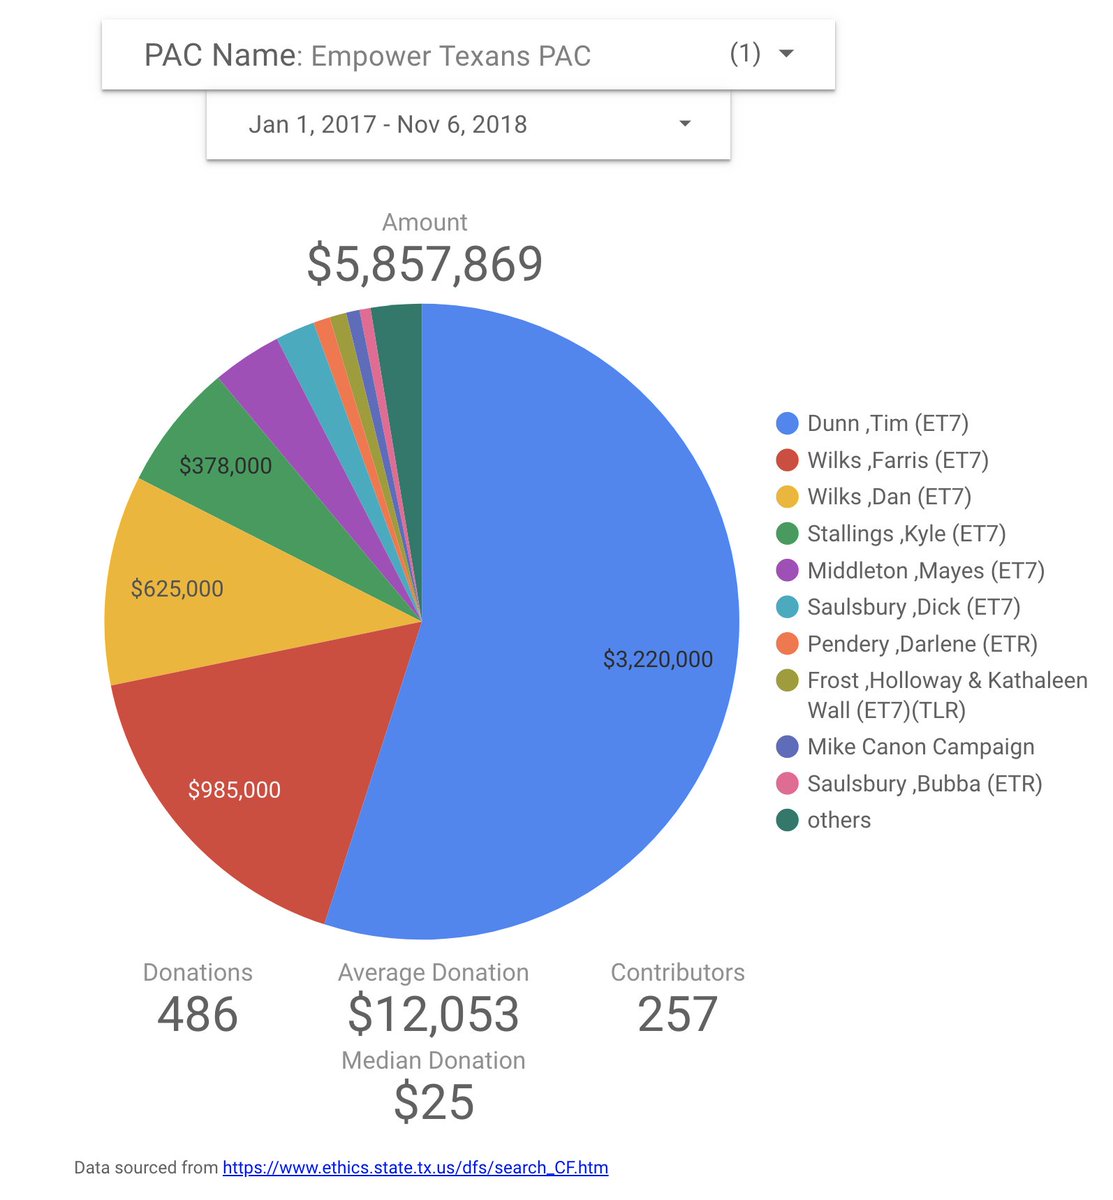 Quick lesson on the Empower Texans web. Here are the primary donors to ET during the 2018 election cycle, who gave 96% of their $5.8 million total:- Tim Dunn- Farris Wilks- Dan Wilks- Kyle Stallings- Mayes Middleton- Dick Saulsbury- Darlene Pendery- Holloway Frost